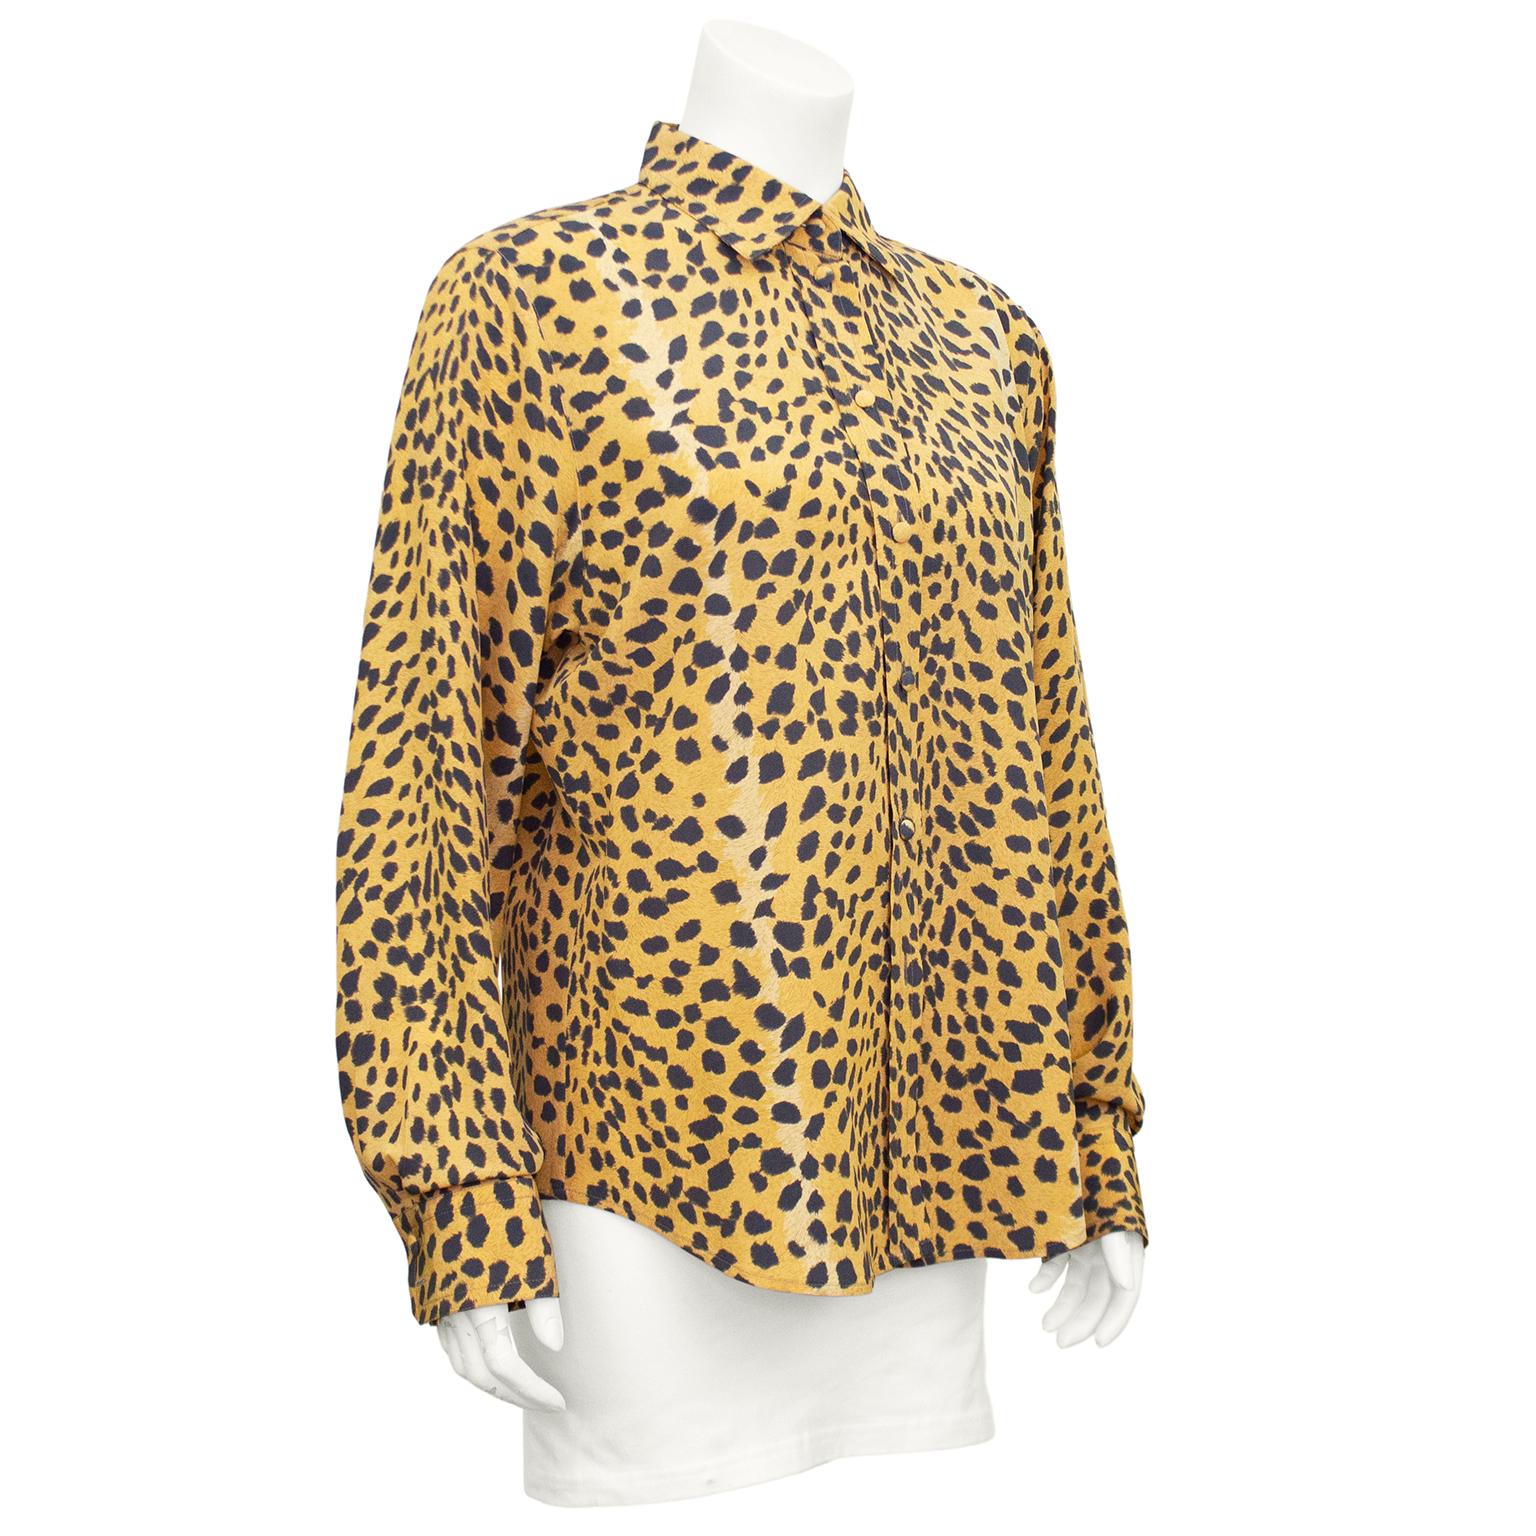 Rena Lange all over leopard print silk shirt from the 1990s. Classic shape with fabric covered buttons and bishop sleeves. Leopard is a neutral and essential part of any wardrobe. Excellent vintage condition. Fits like a US size 6. Made in Germany.